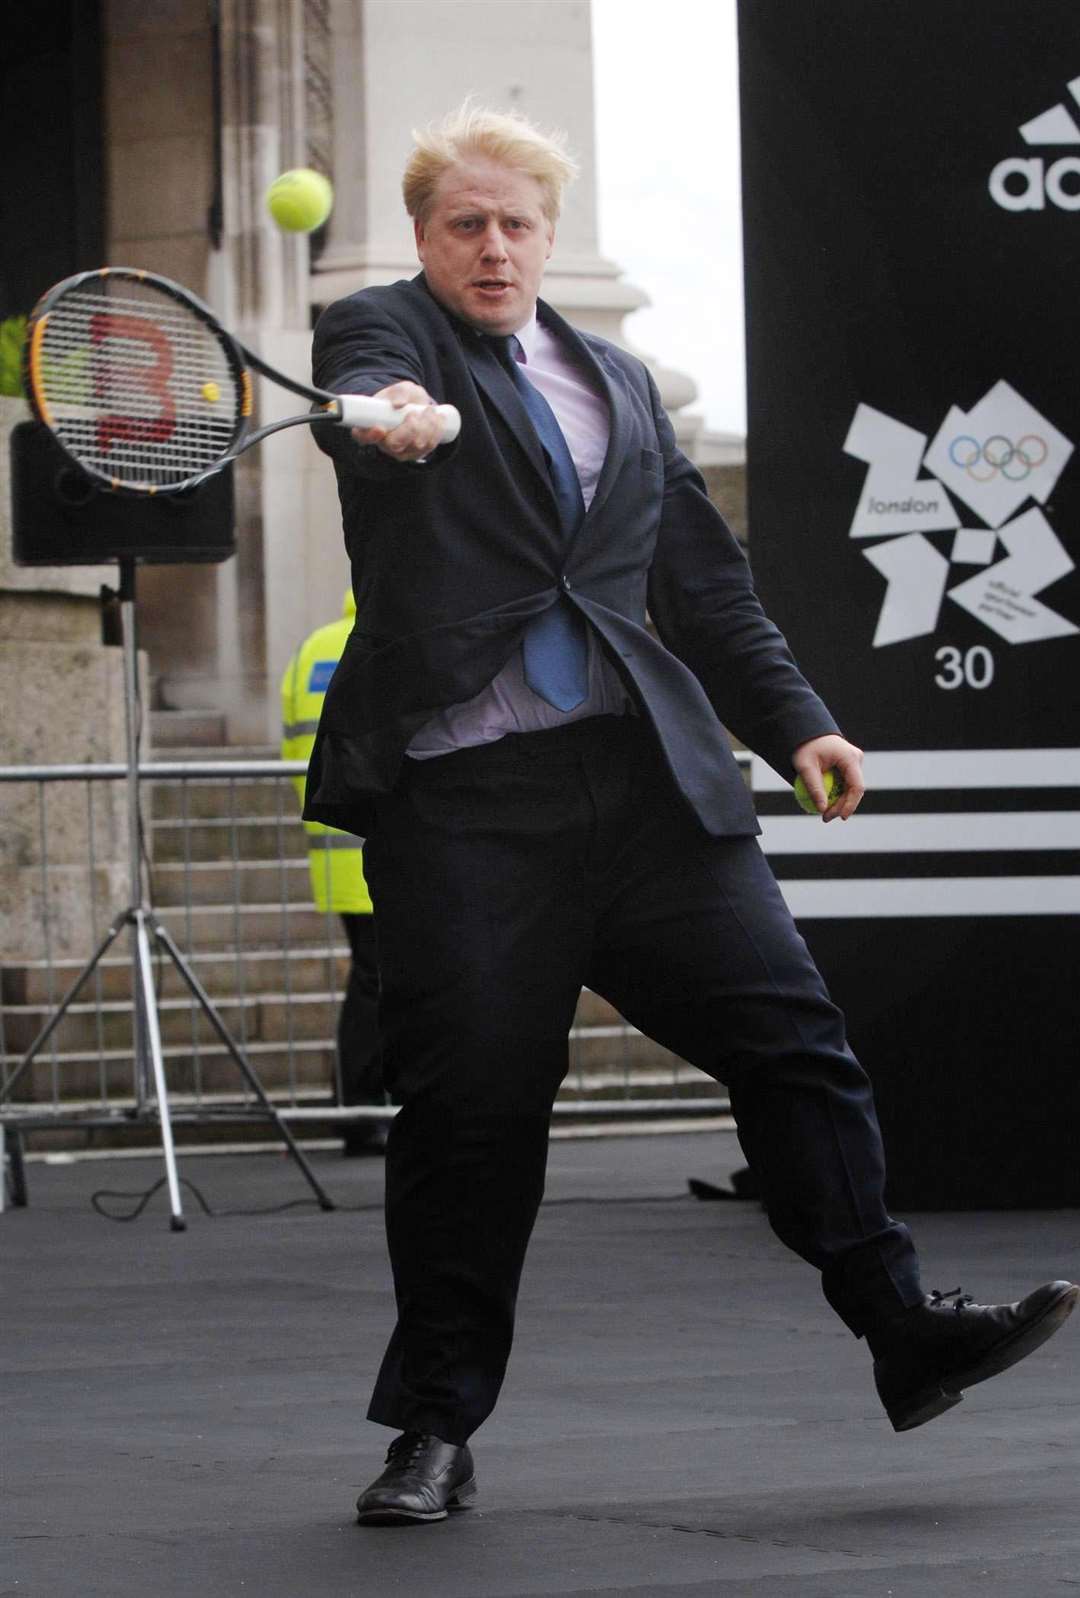 Promoting a sports participation initiative outside County Hall in London in 2008 (Tim Ireland/PA)